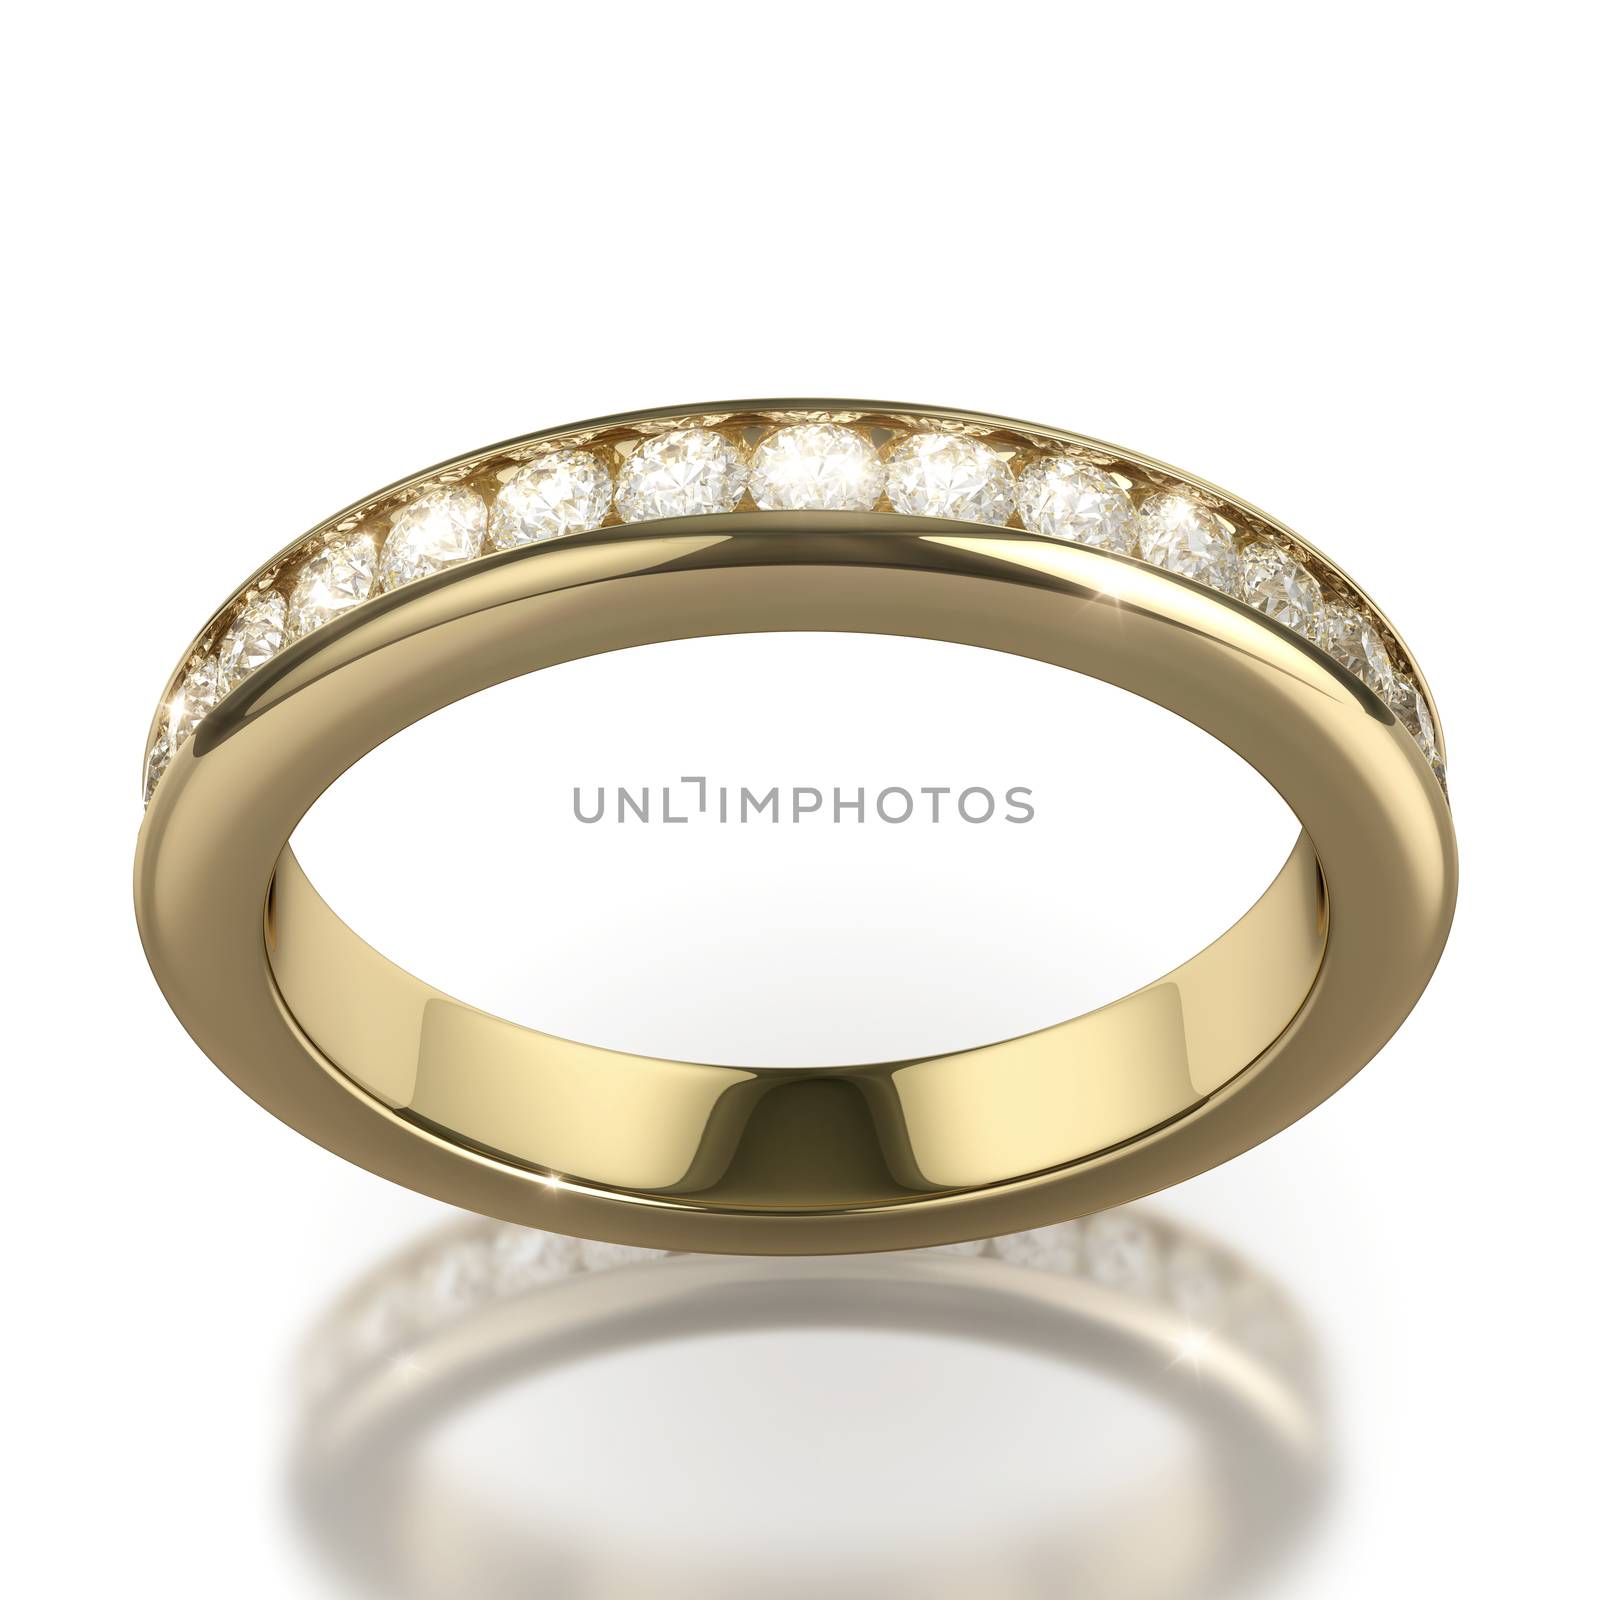 Wedding dIamond ring on white background - clipping path by 123dartist